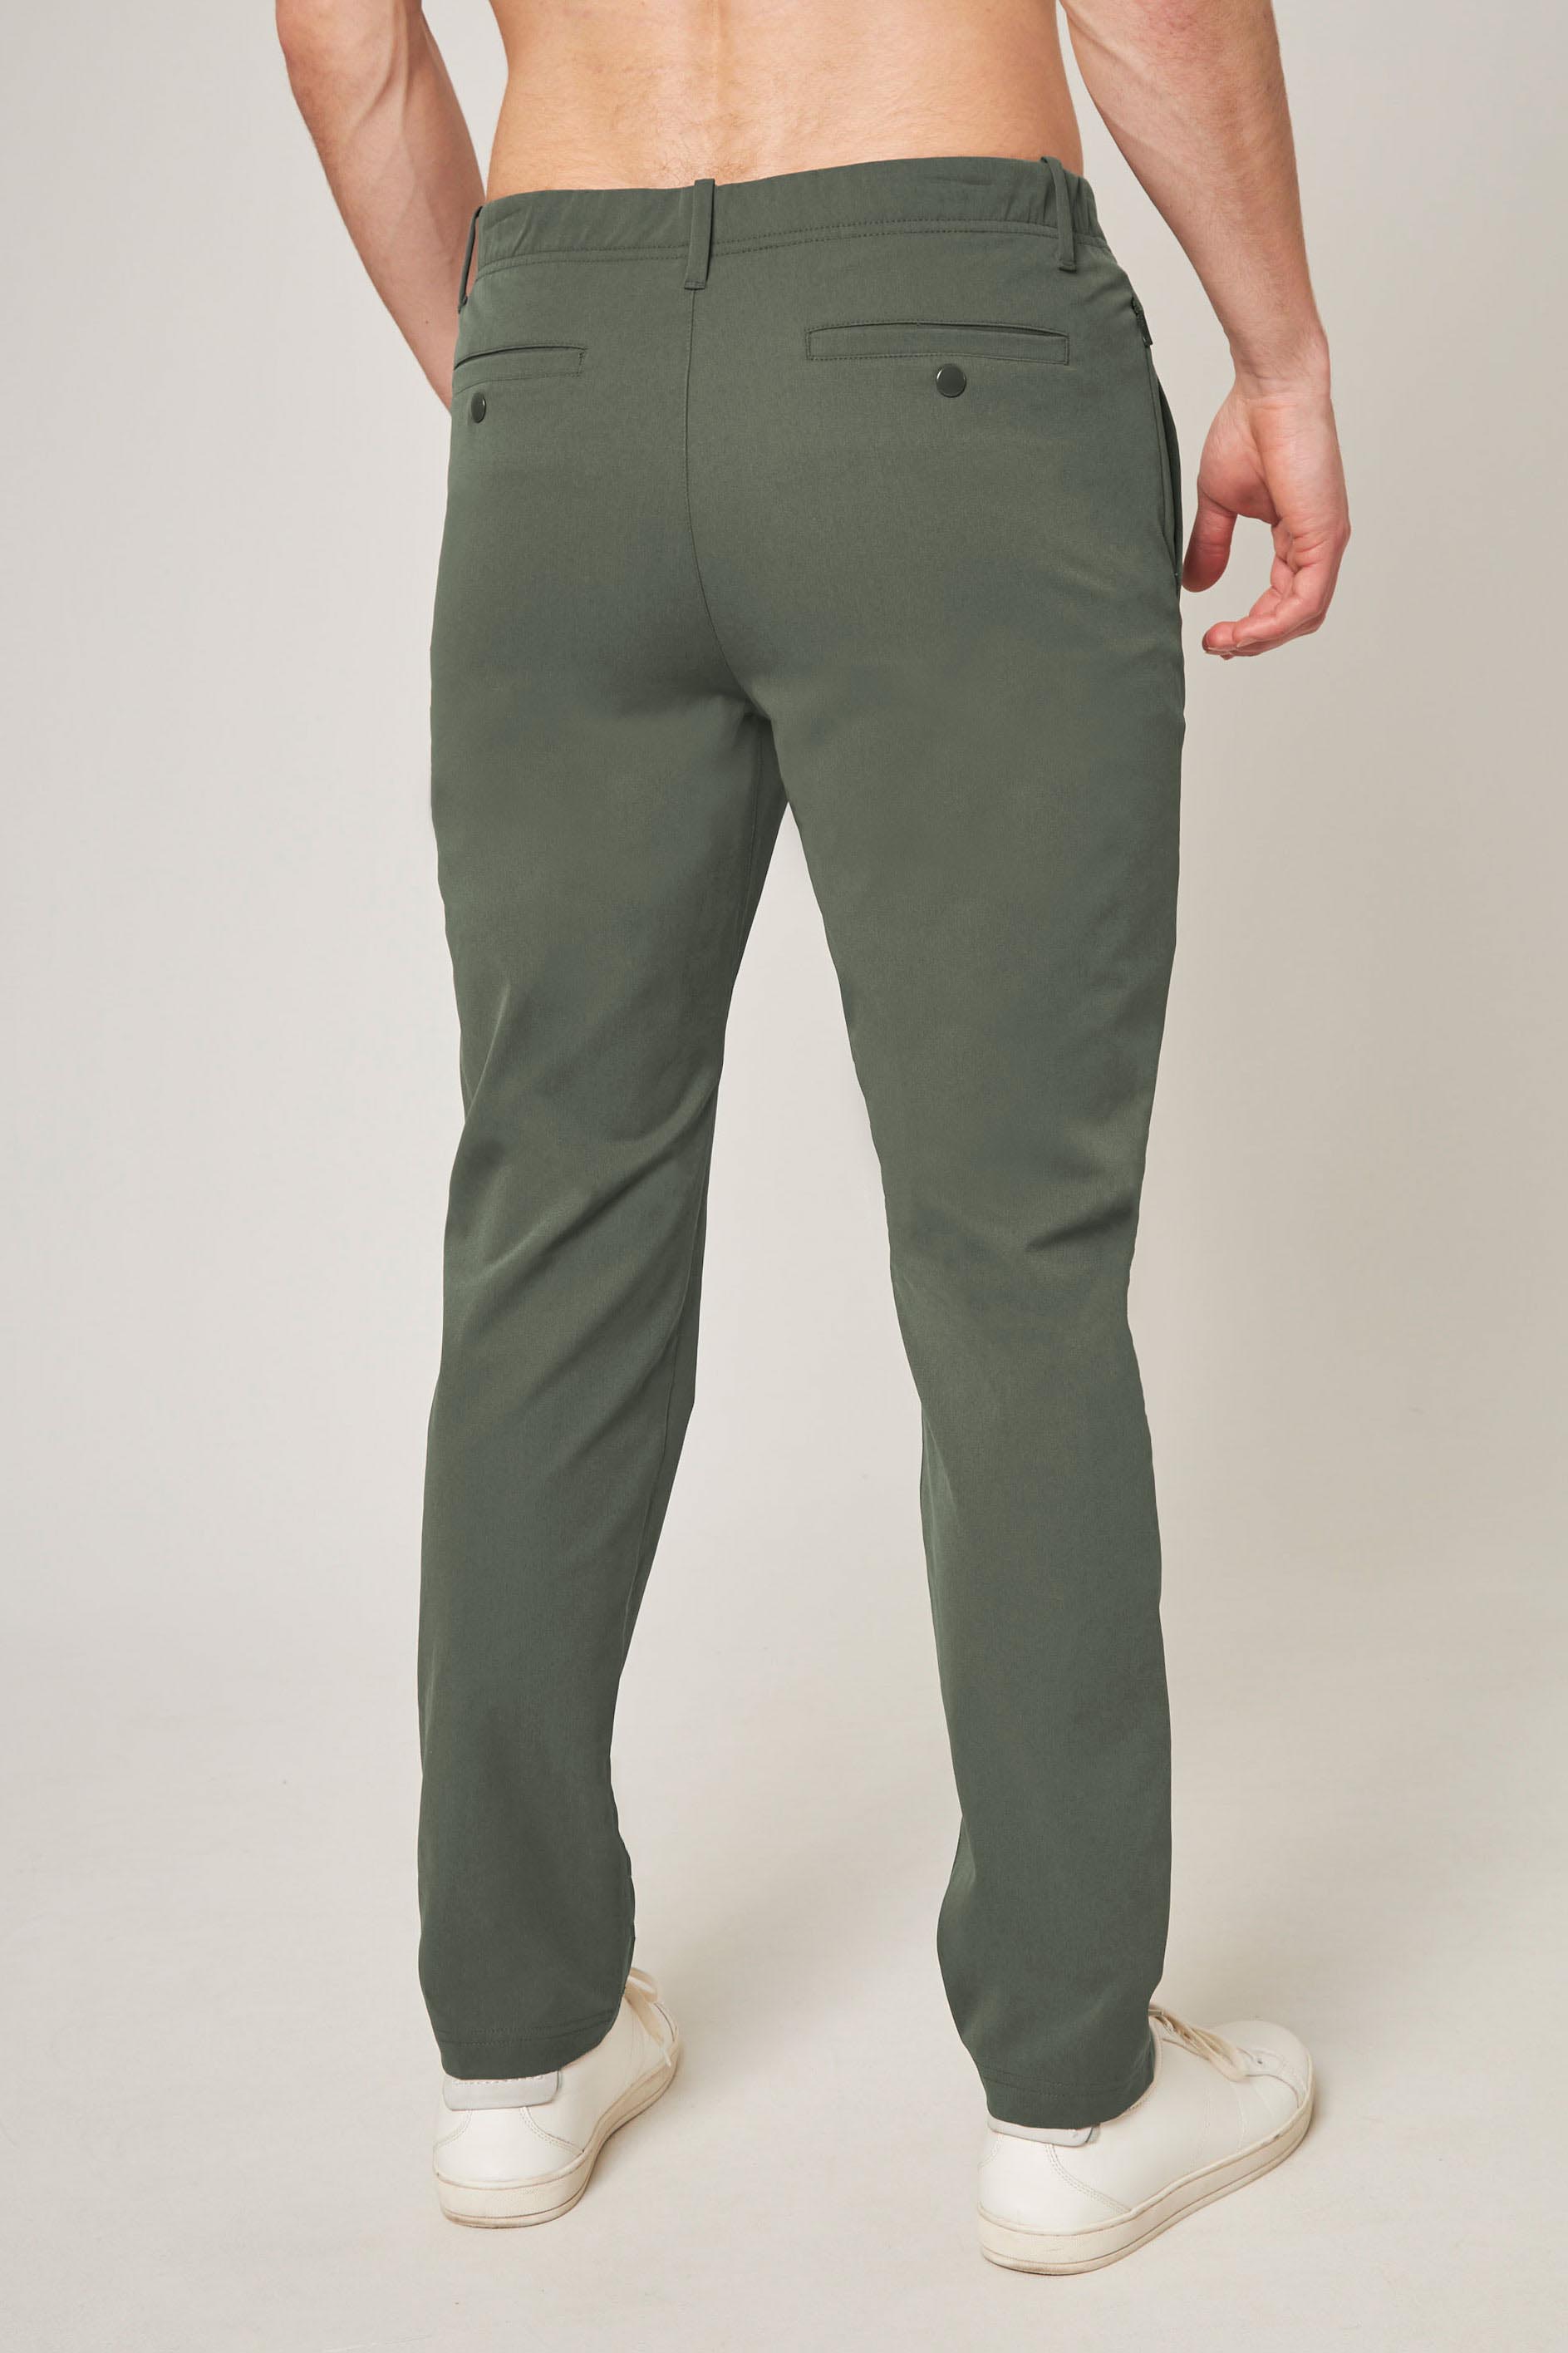 Men’s Mission Fly Front Travel Pant